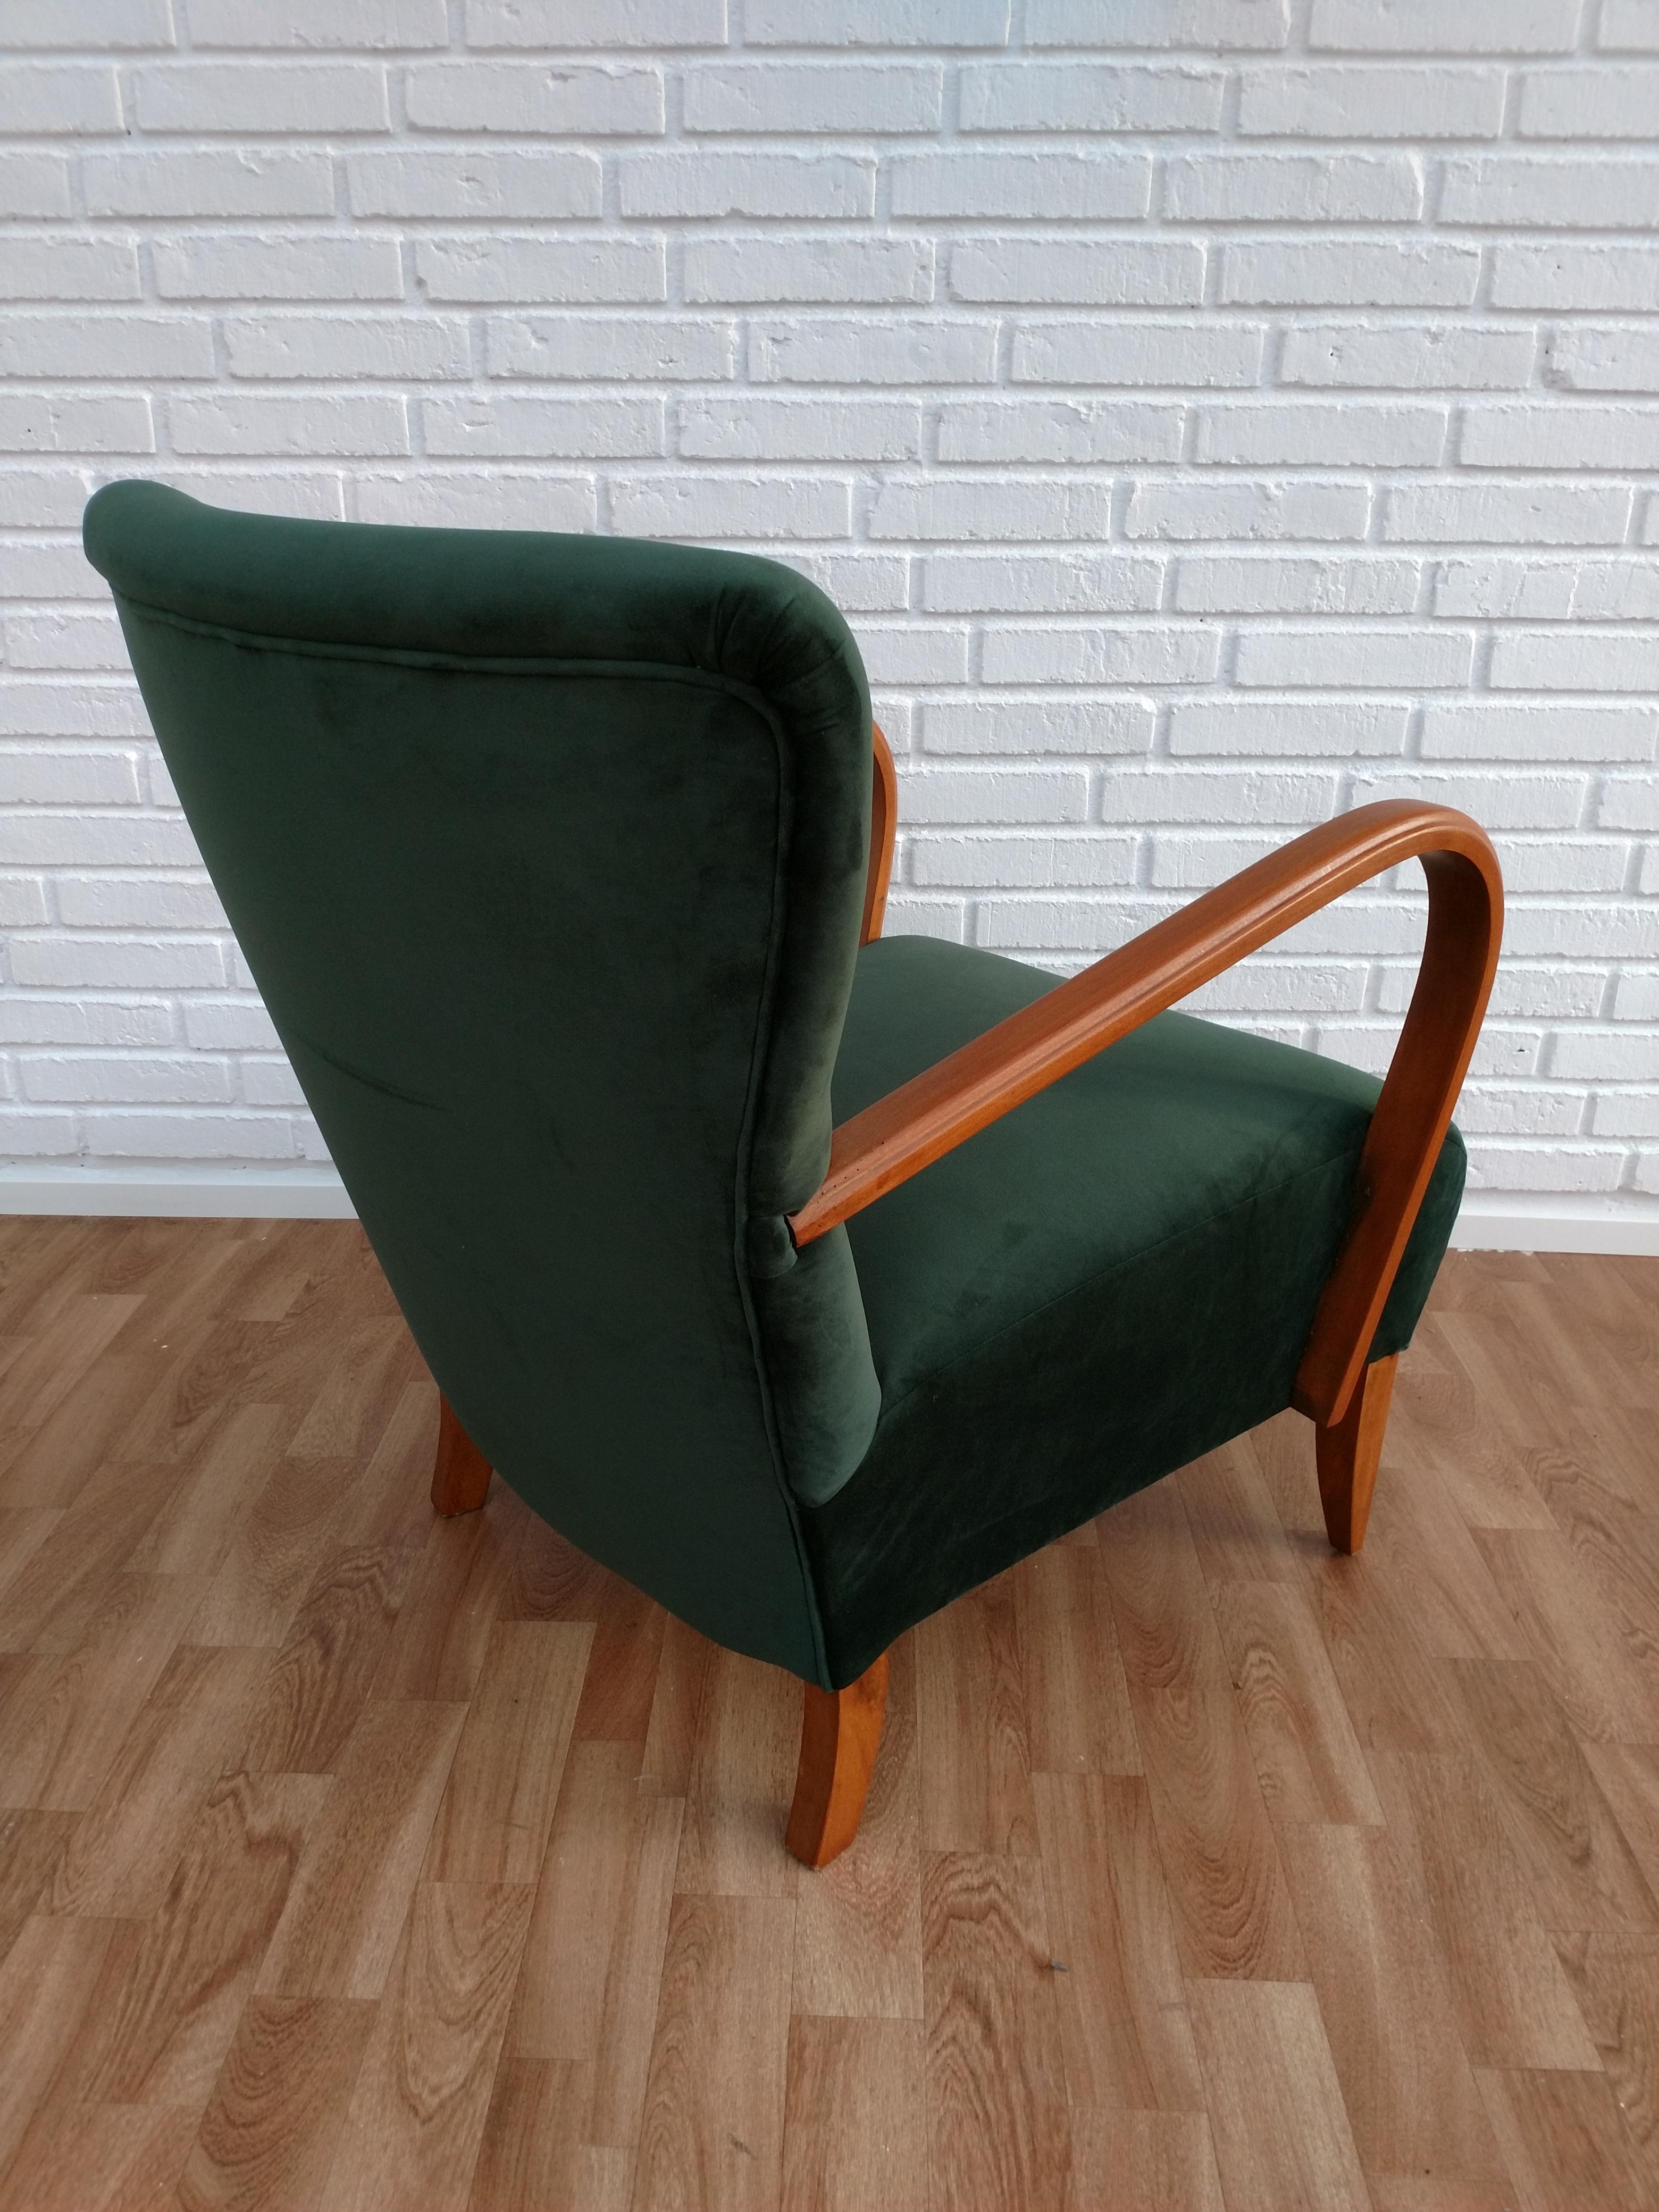 Danish Art Deco Armchair, Velour, 1950s, Completely Restored In Good Condition For Sale In Tarm, DK